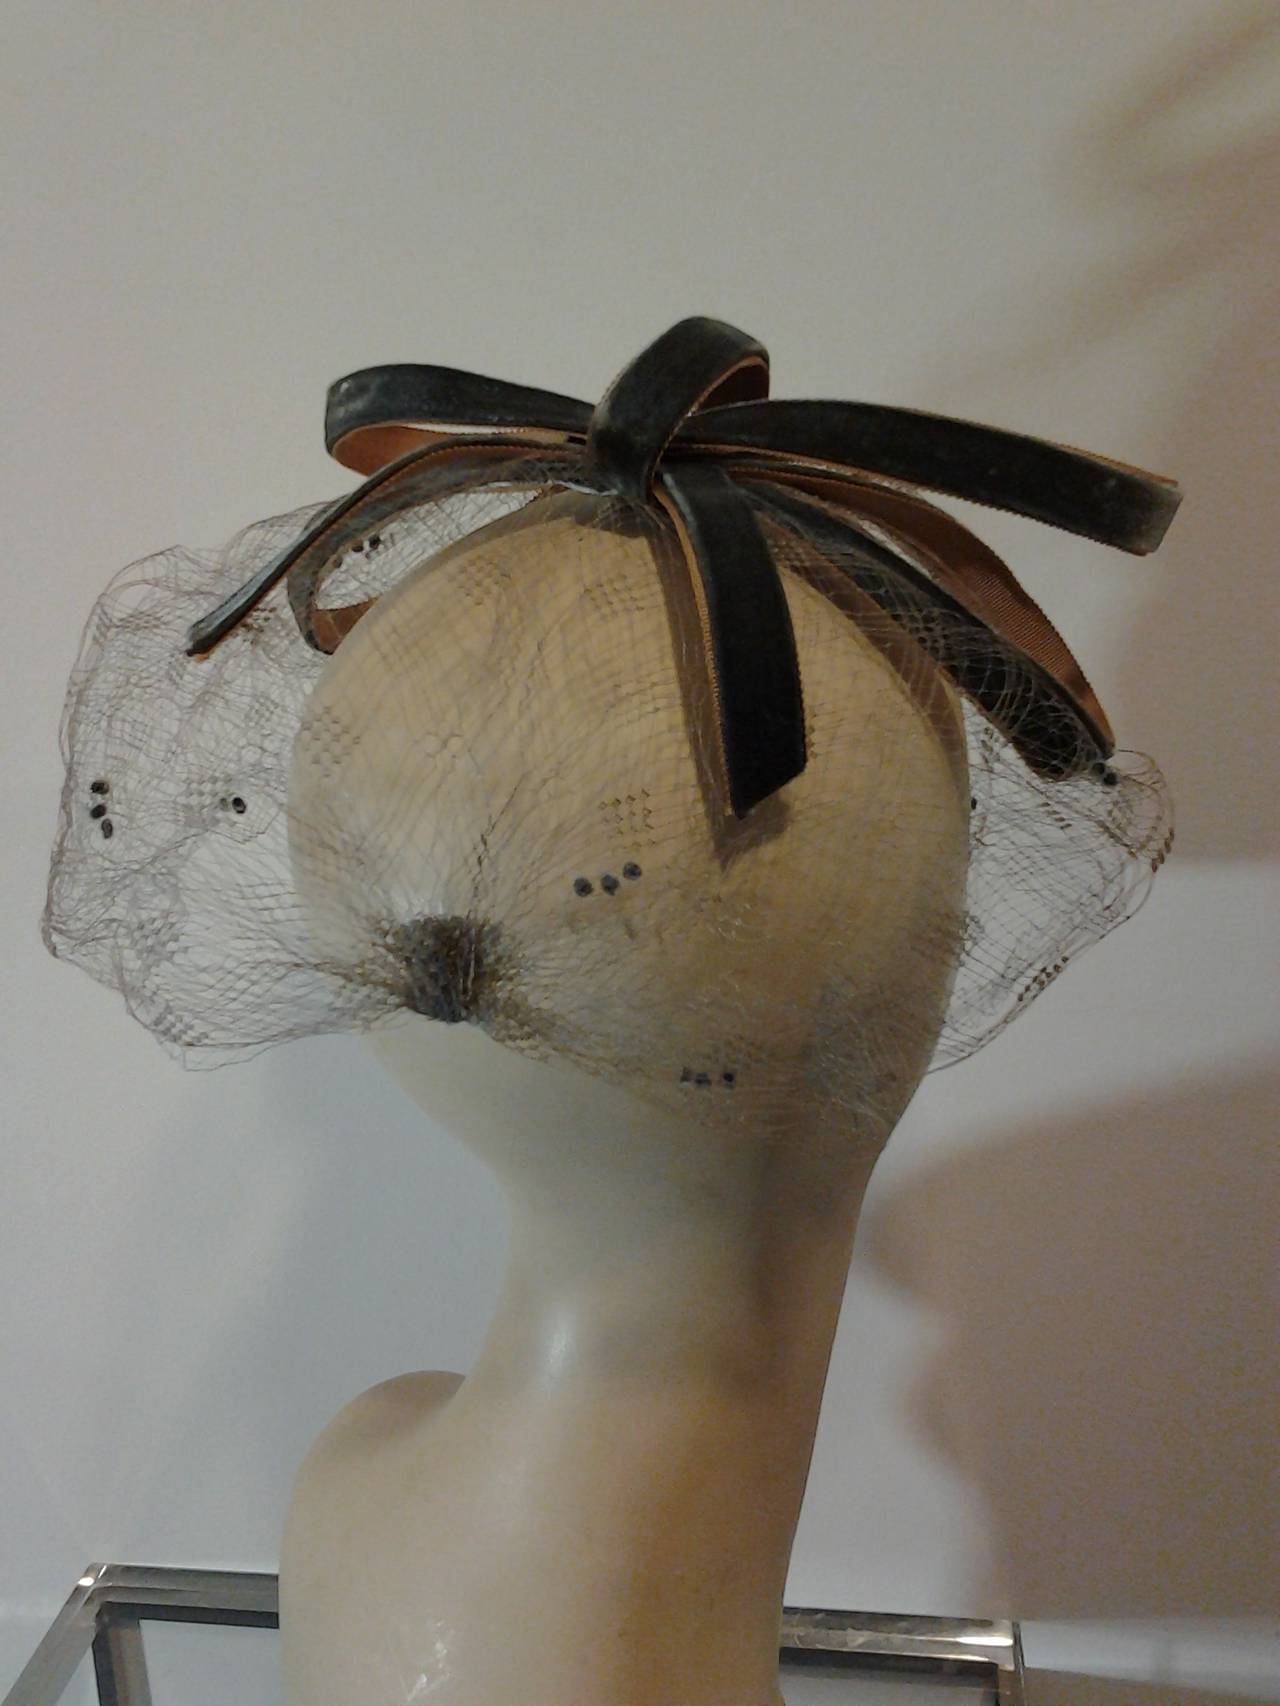 A beautiful 1960s Vidal veiled fascinator hat of stiffened sage green-gray velvet ribbon fashioned in a multi-looped bow with patterned veil